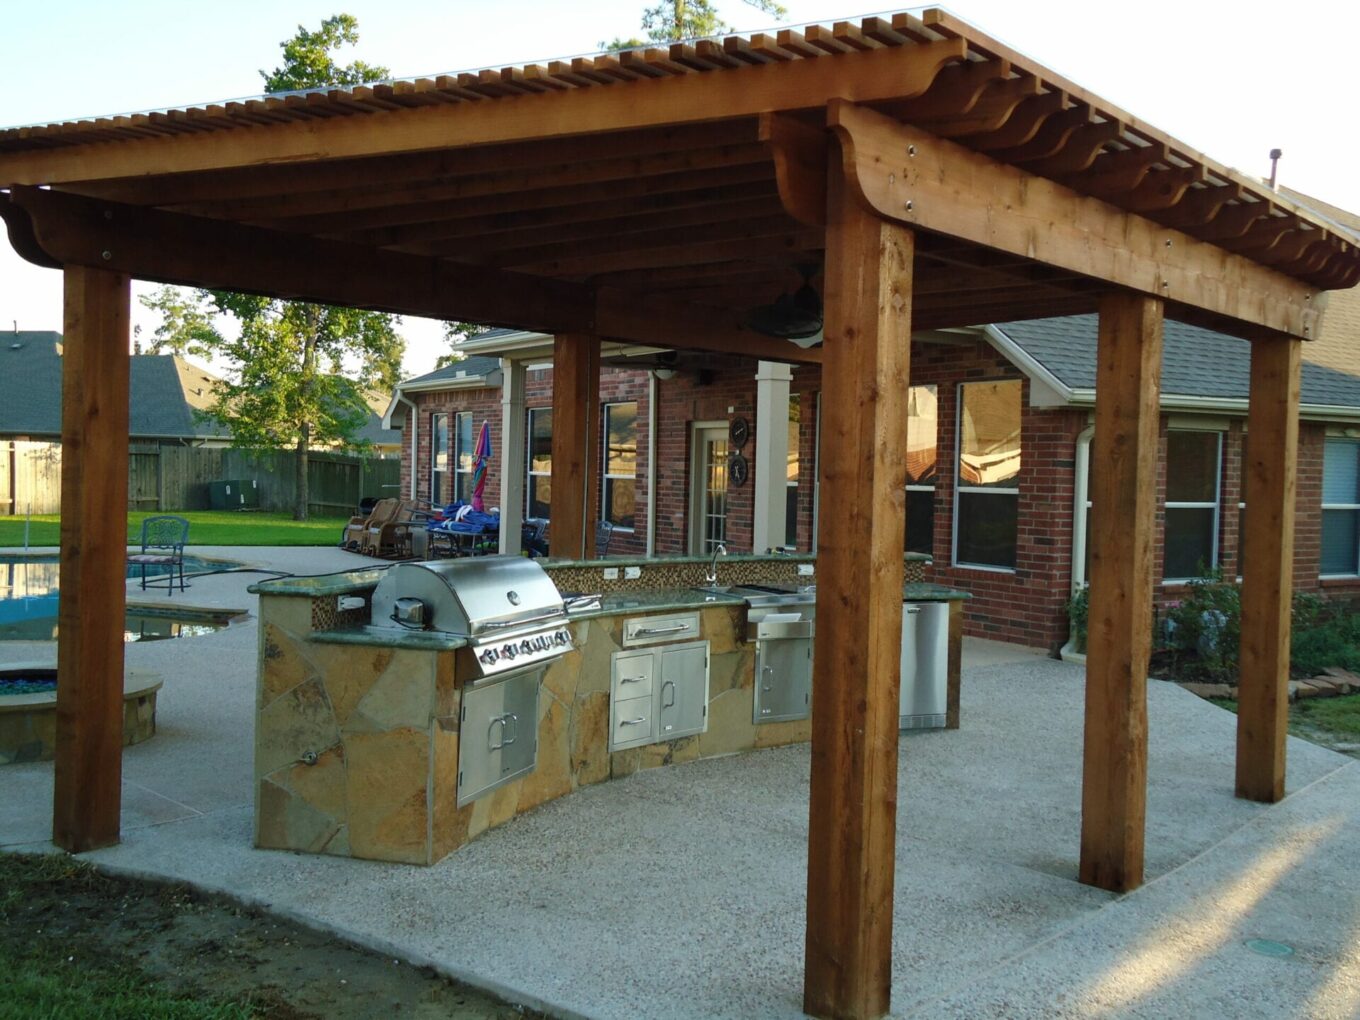 A large outdoor grill area with an open roof.